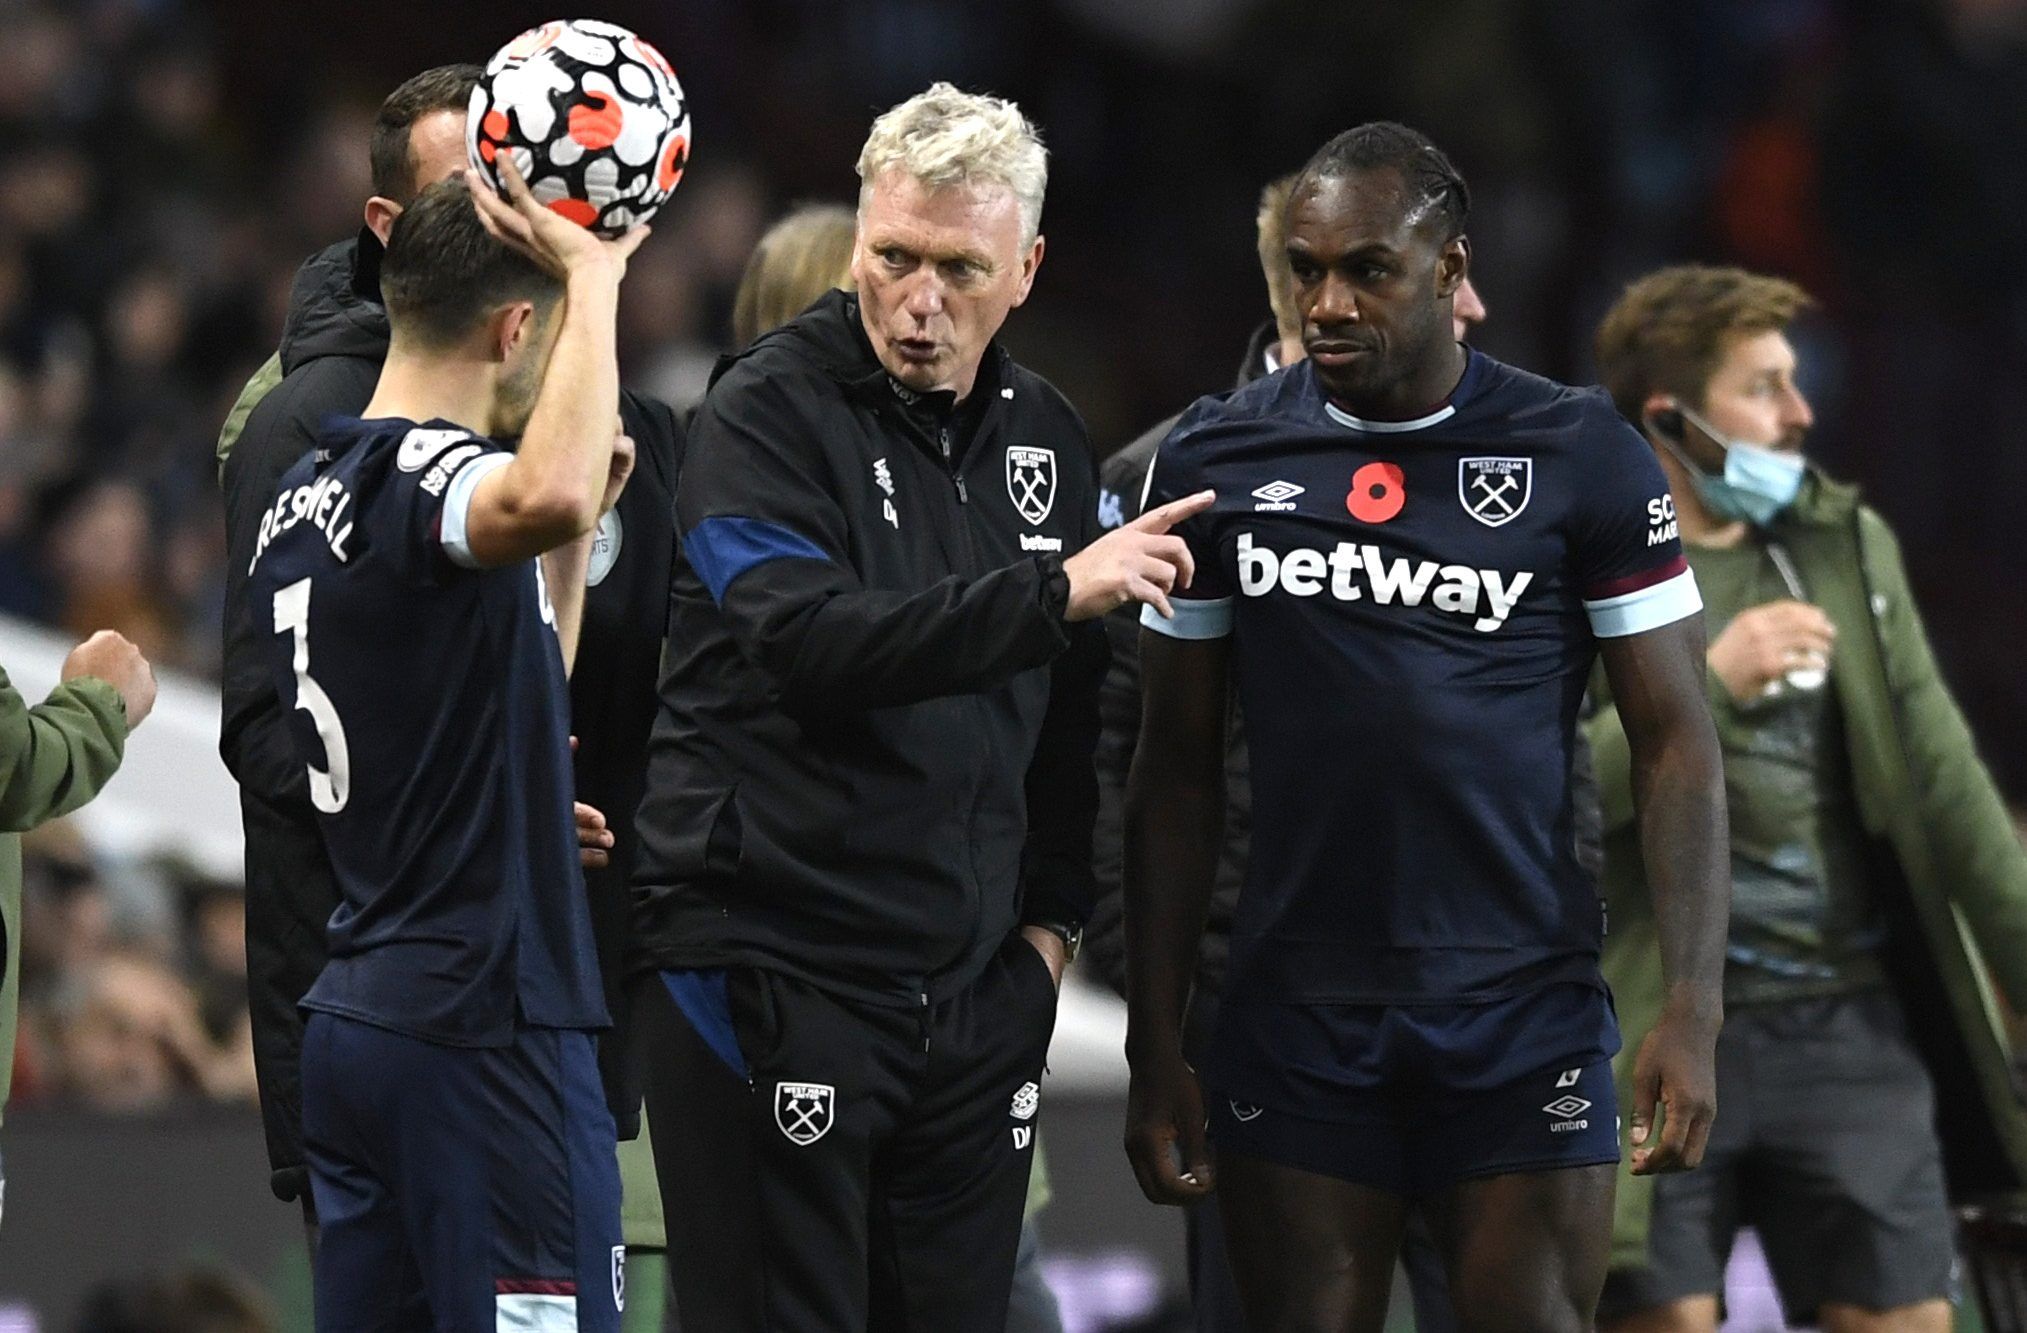 Soccer Football - Premier League - Aston Villa v West Ham United - Villa Park, Birmingham, Britain - October 31, 2021 West Ham United manager David Moyes gives instructions to Michail Antonio and Aaron Cresswell during a break in play REUTERS/Tony Obrien EDITORIAL USE ONLY. No use with unauthorized audio, video, data, fixture lists, club/league logos or 'live' services. Online in-match use limited to 75 images, no video emulation. No use in betting, games or single club /league/player publicatio